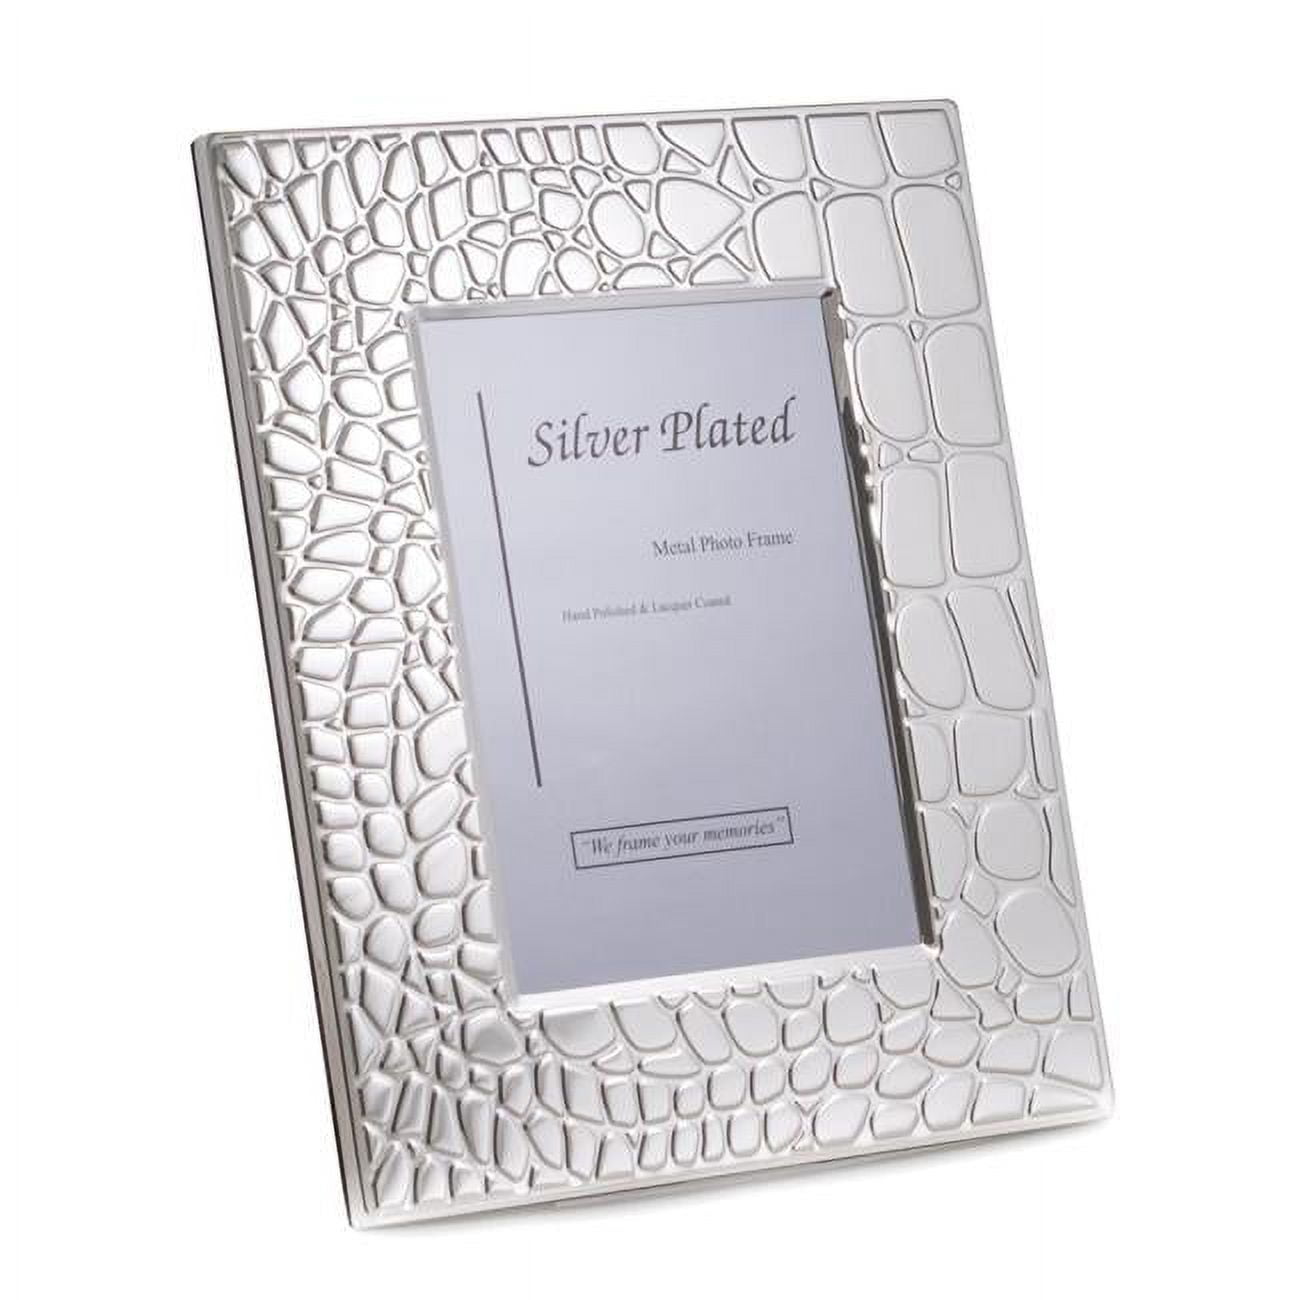 Picture of Bey-Berk International SF110-12 8 x 10 in. Silver Plated with Croco Design Picture Frame with Easel Back